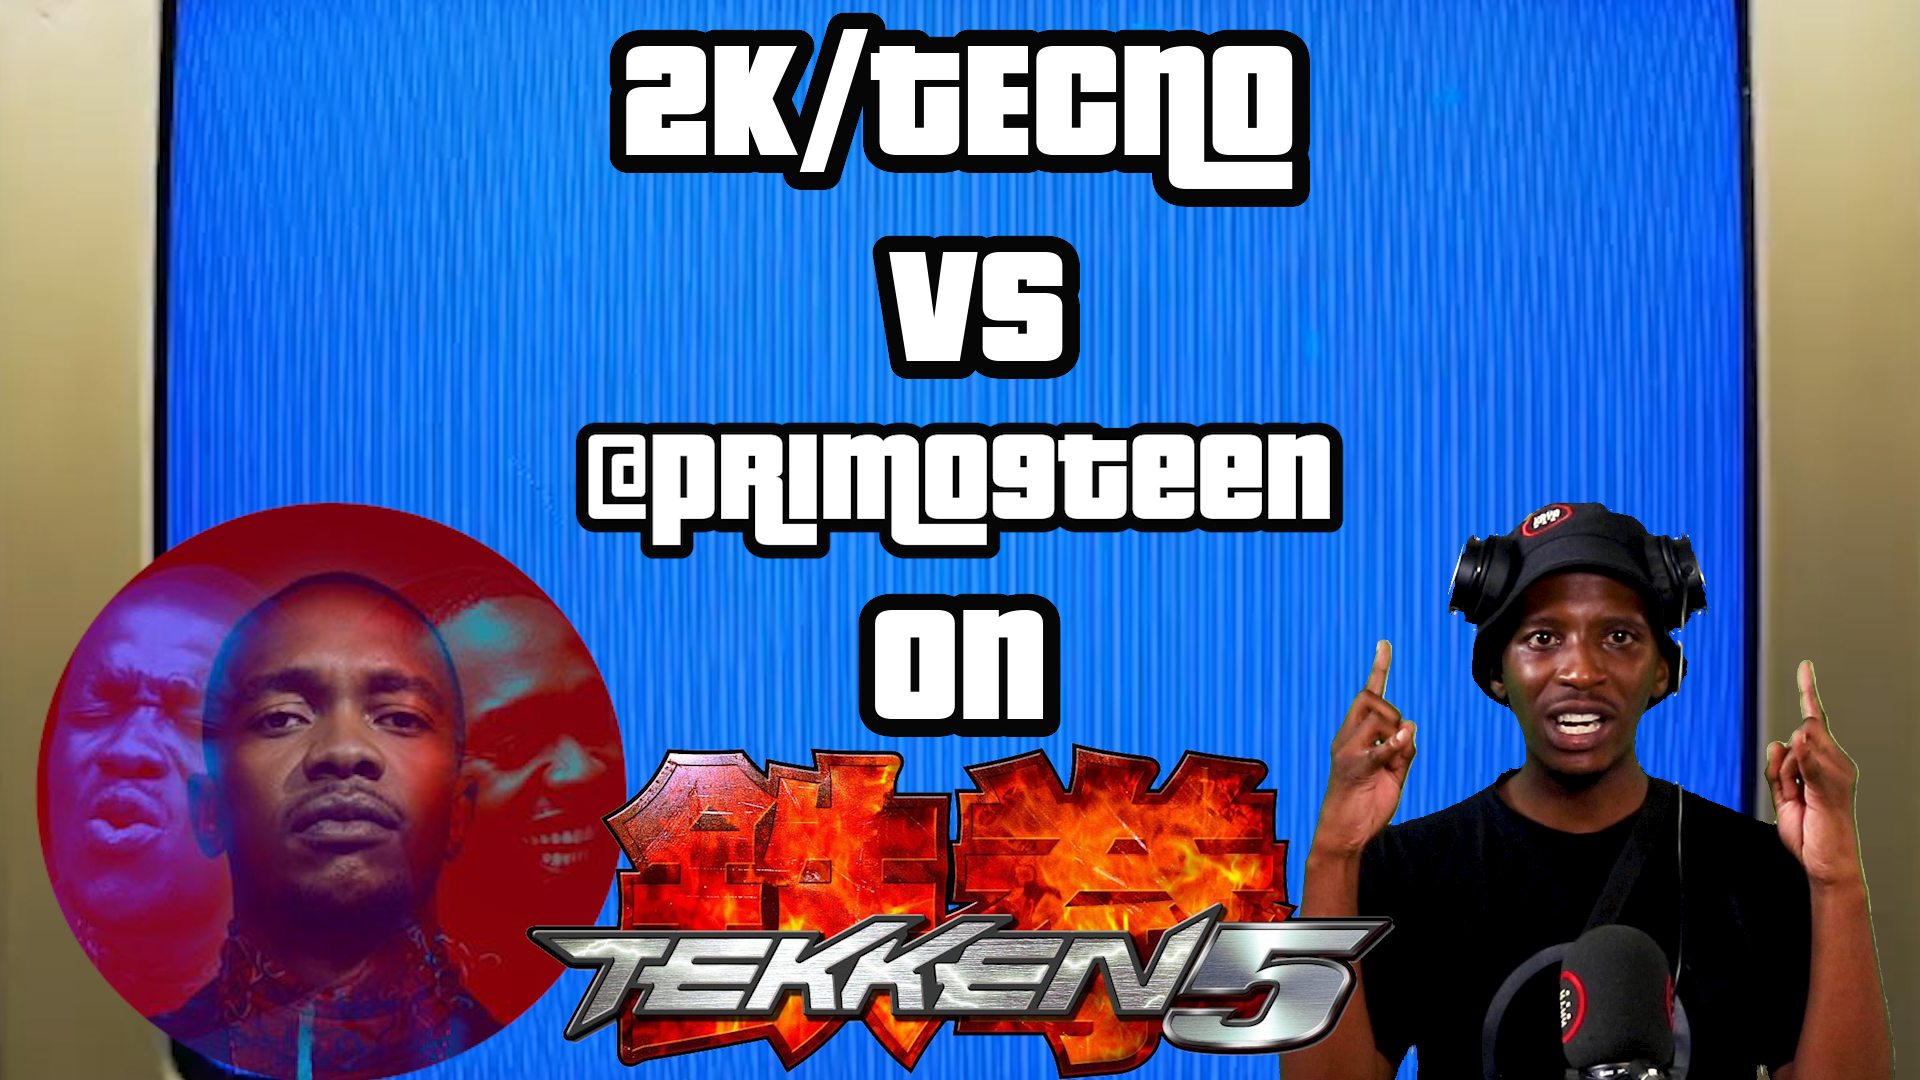 [WATCH] 2K/TECNO VS Episode 1 with @Primo9teen